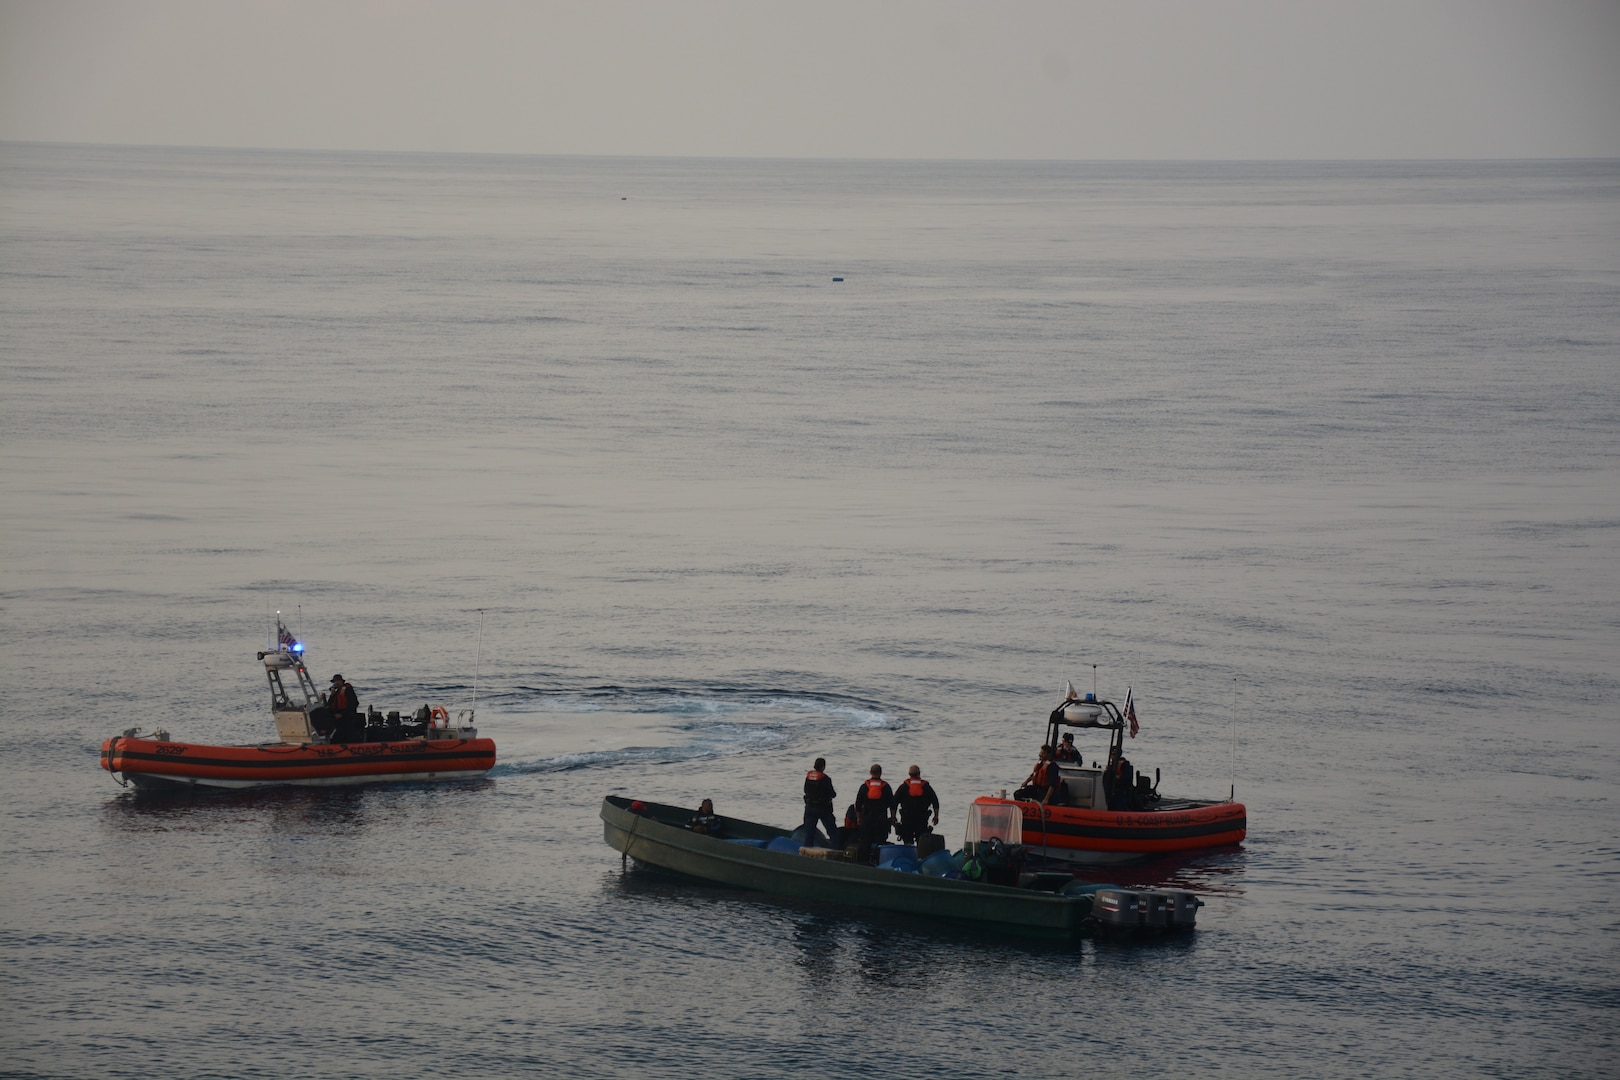 Coast Guard Cutter Alert (WMEC 630) gains positive control of a suspected drug smuggling vessel in the Eastern Pacific Ocean May 26, 2023. A boarding team interdicted more than 2,600 kilograms of cocaine. (U.S. Coast Guard photo)